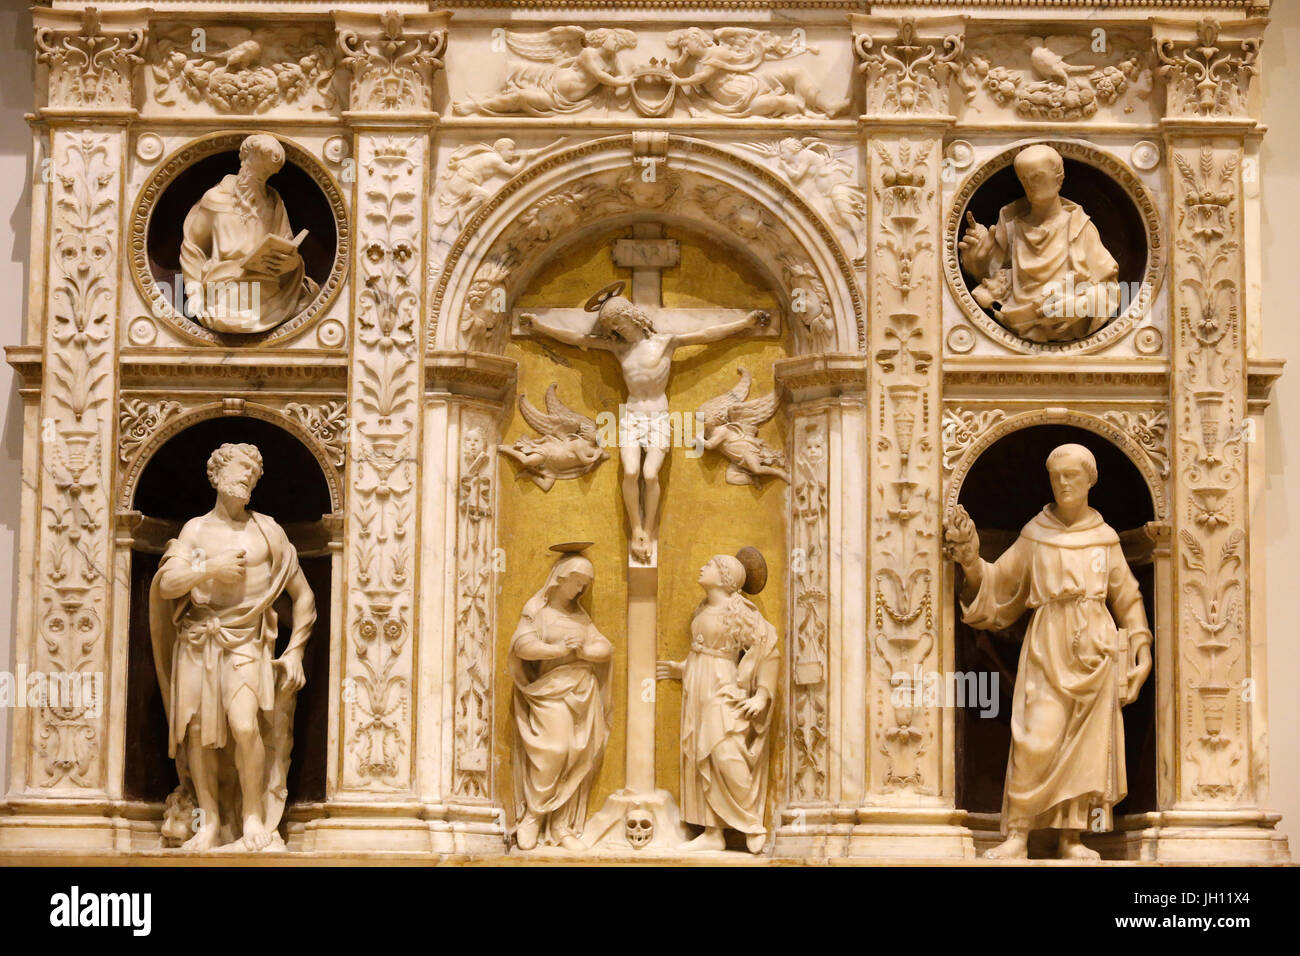 The Victoria and Albert Museum. Altarpiece with the crucifixion flanked by saints. About 1493. Andrea Ferrucci. Italy, Fiesole (Tuscany). Marble. Unit Stock Photo